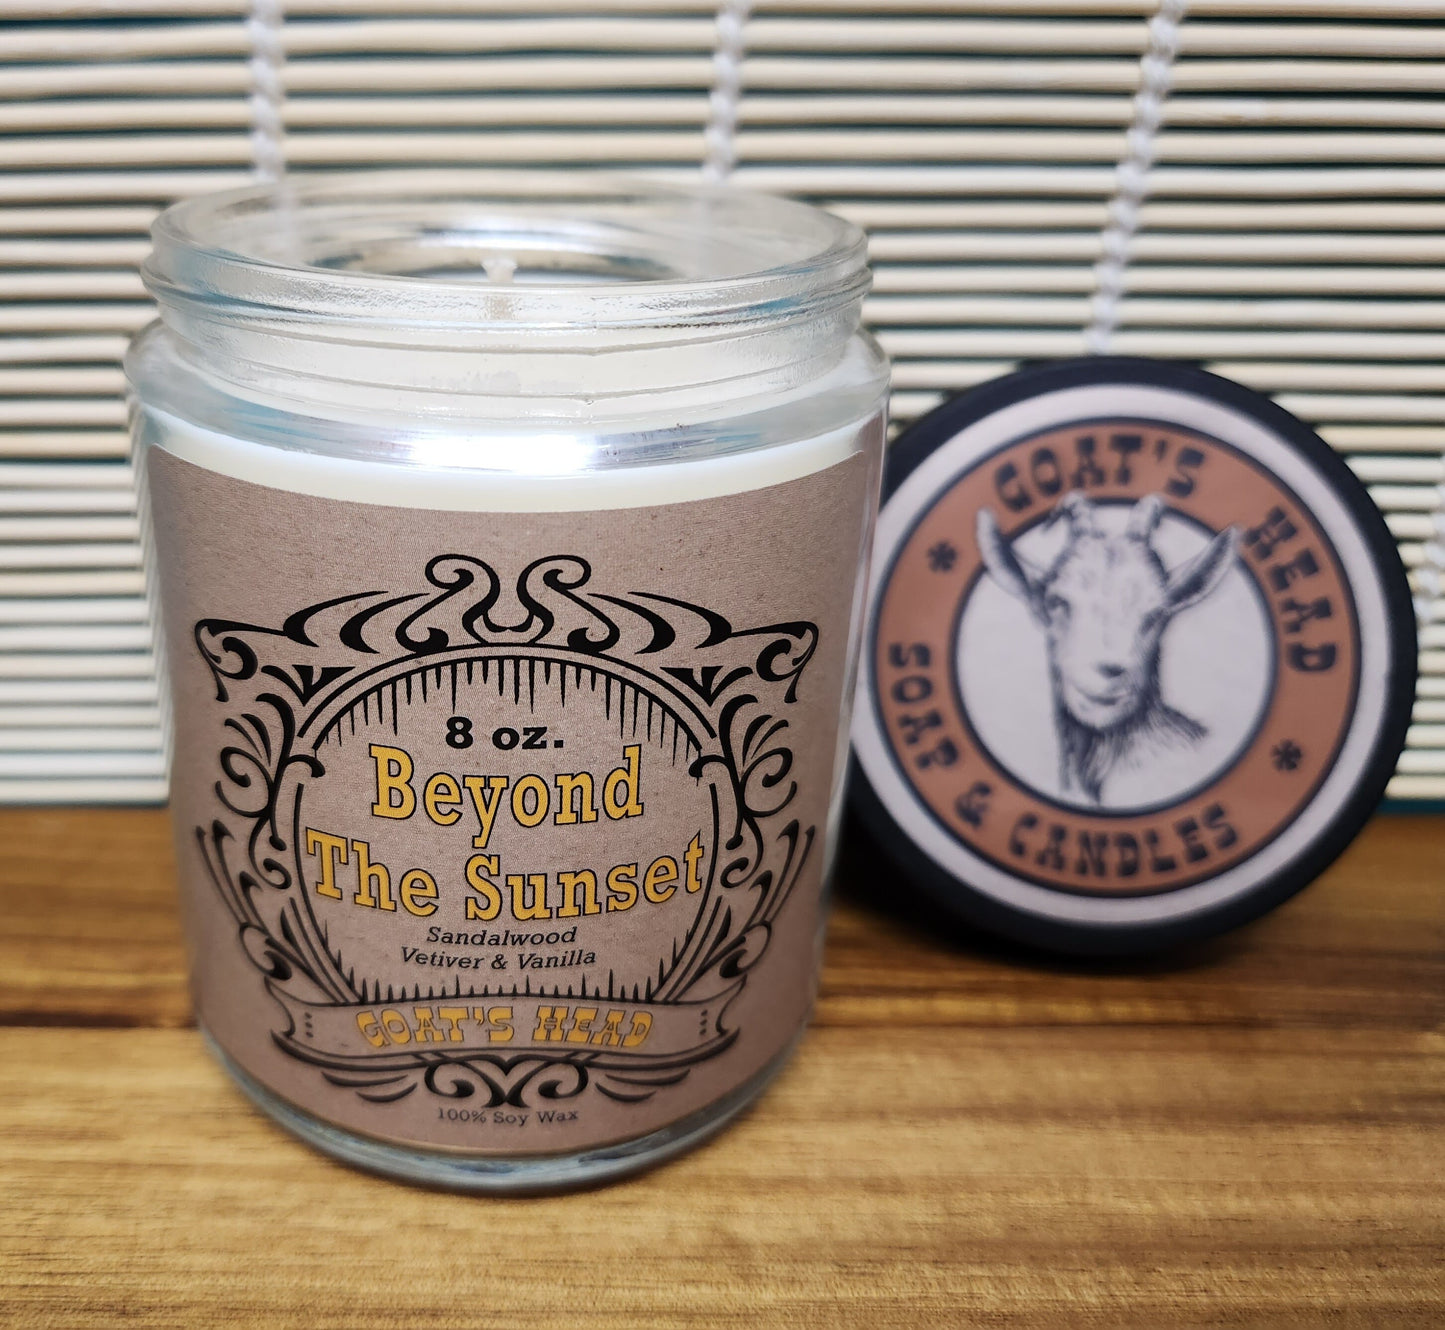 Goat's Head "Beyond The Sunset" Soy Candle 8oz jar